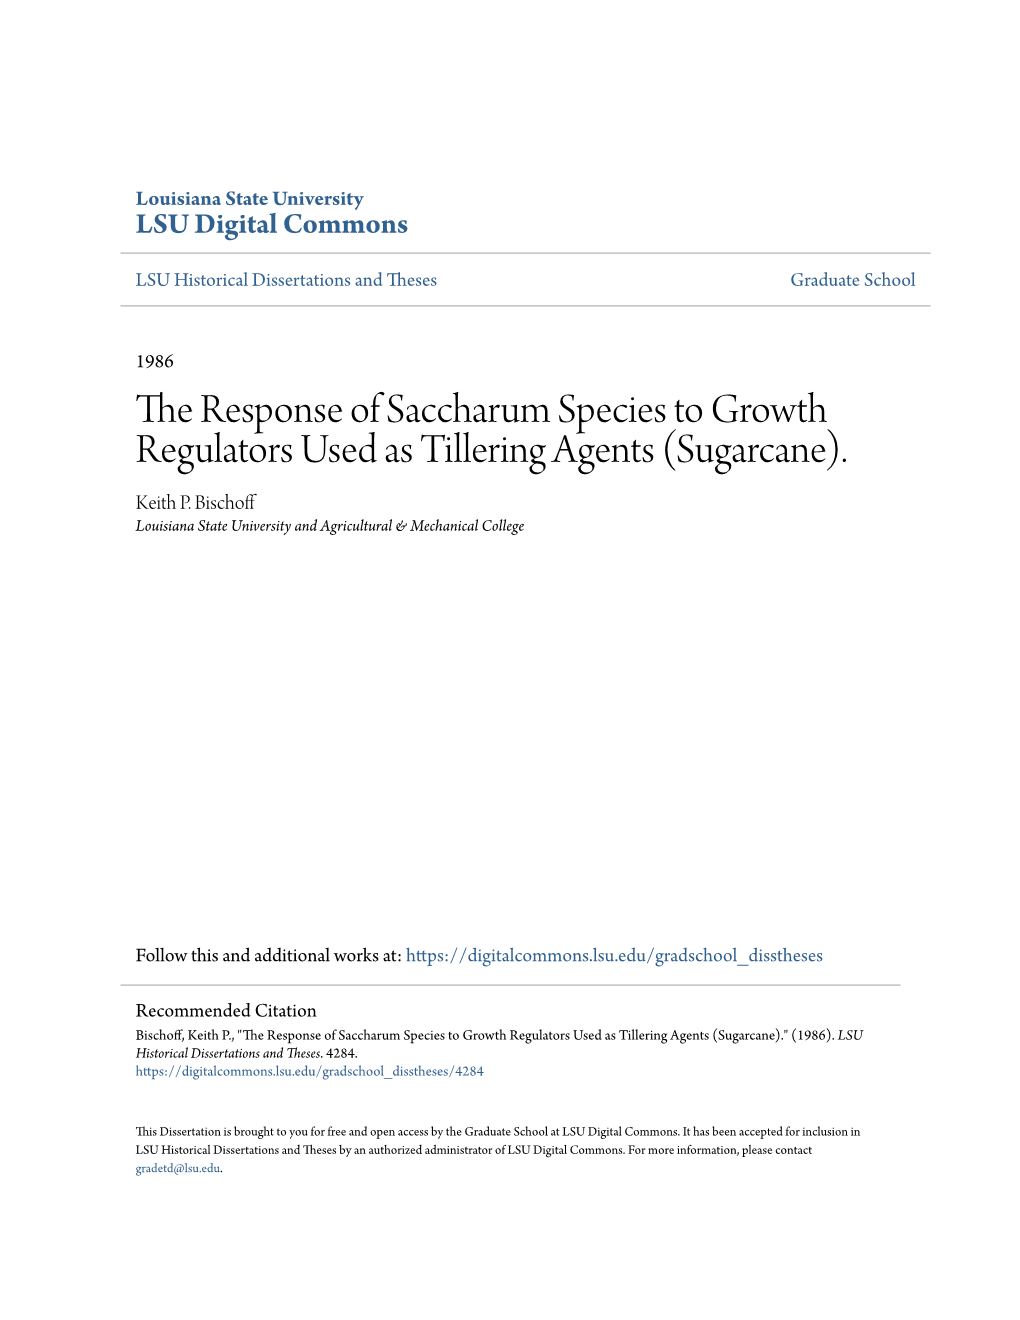 The Response of Saccharum Species to Growth Regulators Used As Tillering Agents (Sugarcane). Keith P